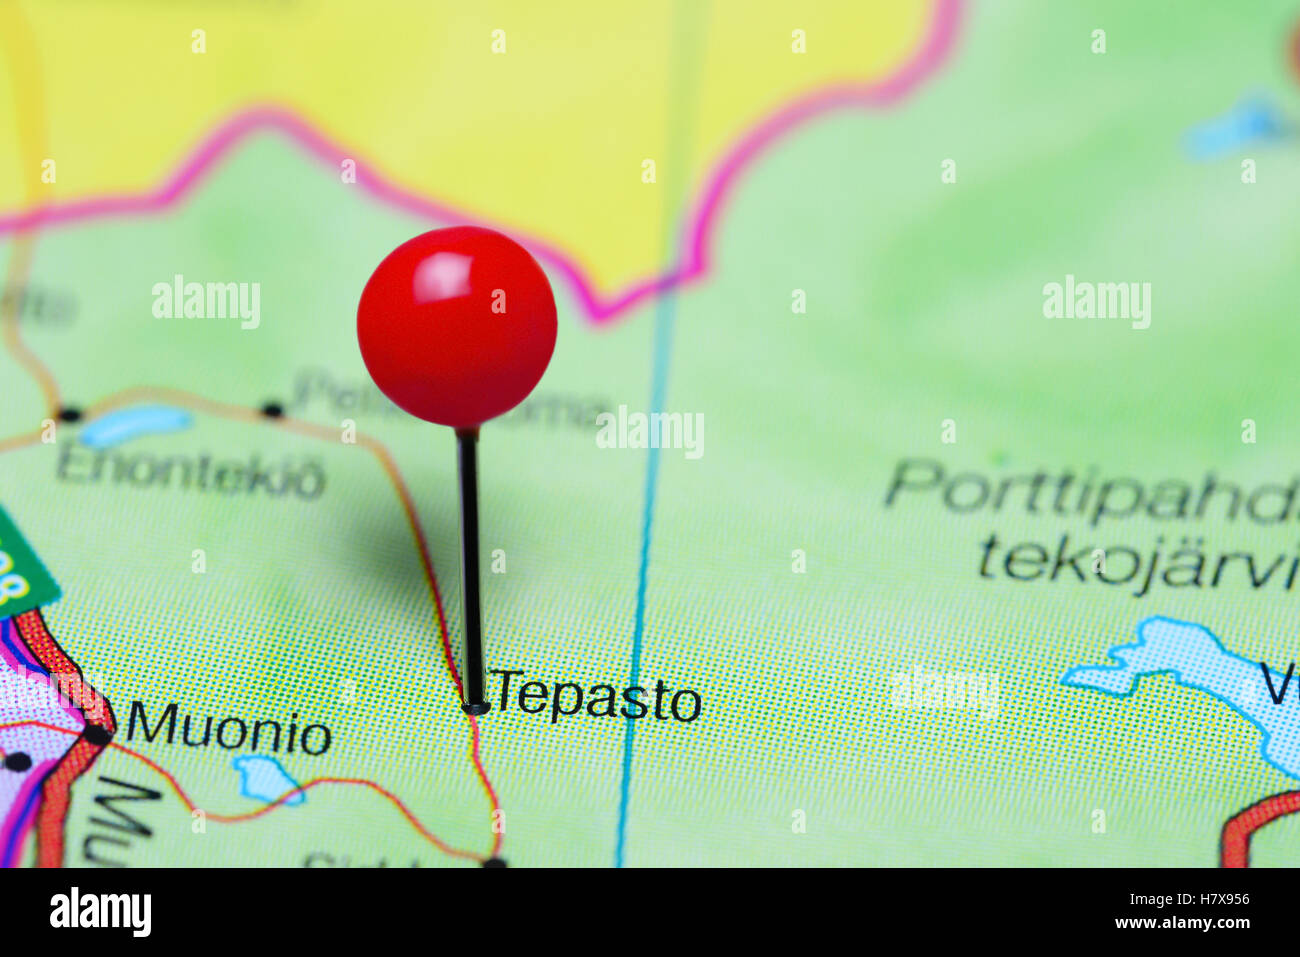 Tepasto pinned on a map of Finland Stock Photo